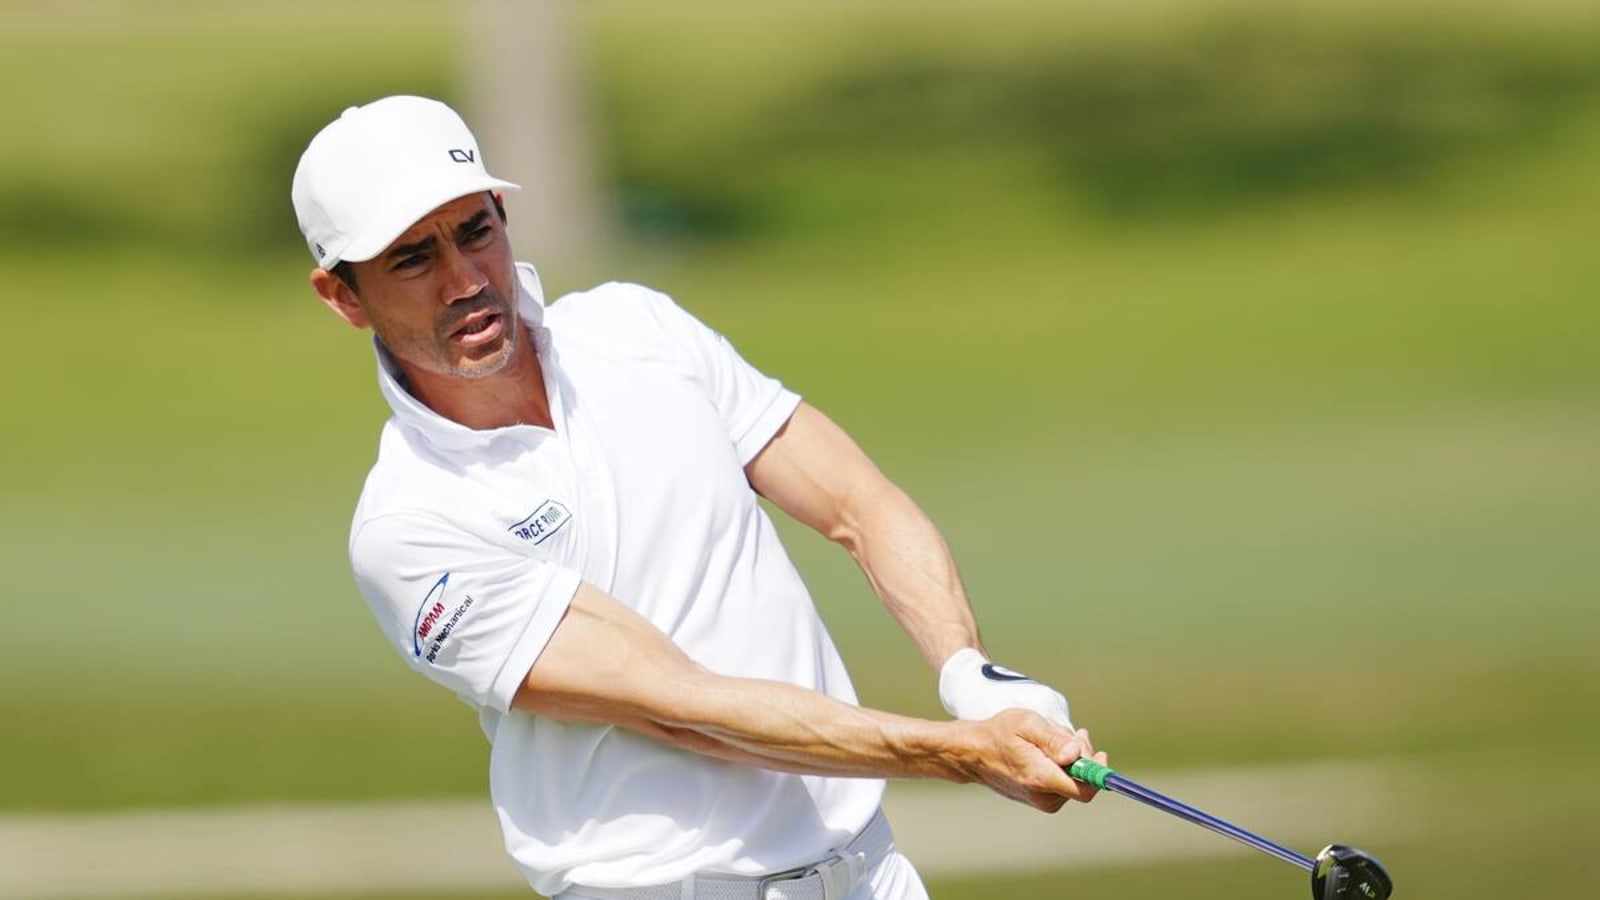 Camilo Villegas at the Mexico Open Live: TV Channel & Streaming Online